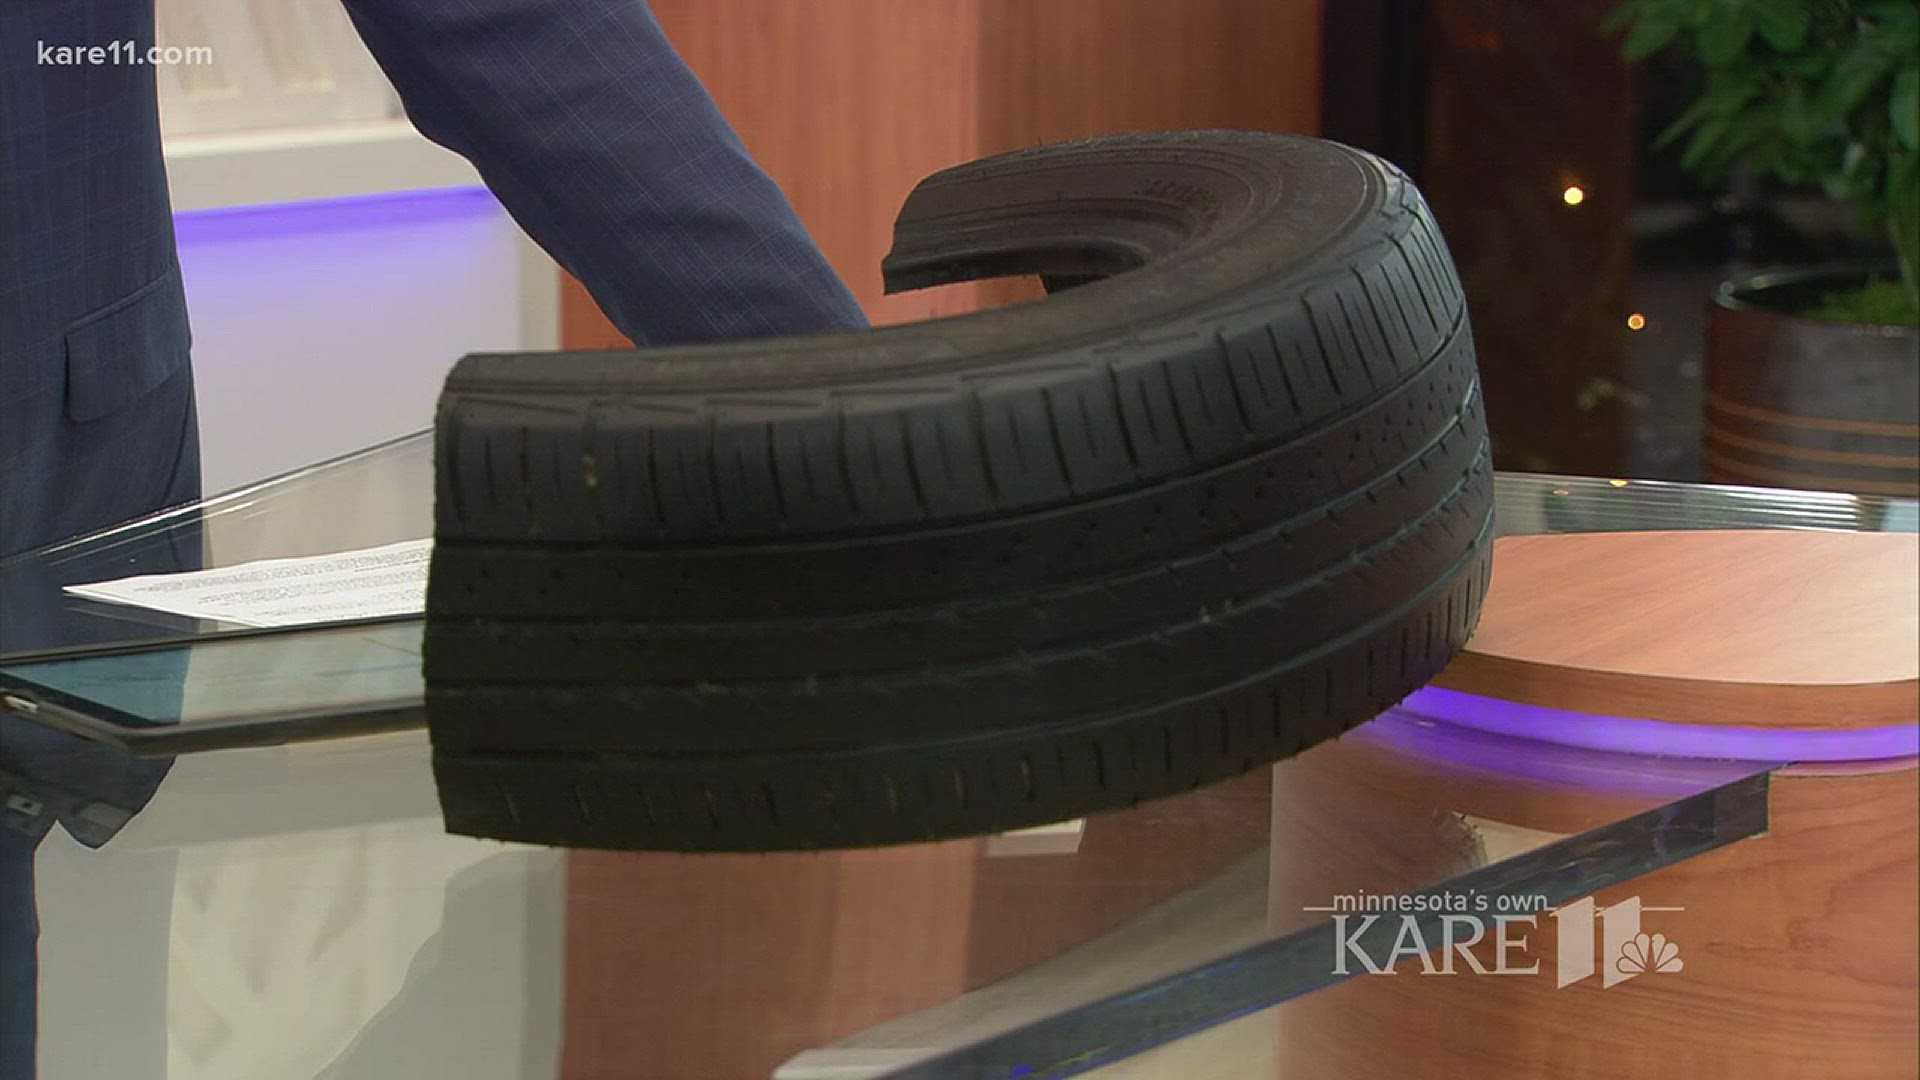 Mike Berger, Car Tip Guru from CarSoup, shared tips for driving safely in the winter. http://kare11.tv/2EKGlgi